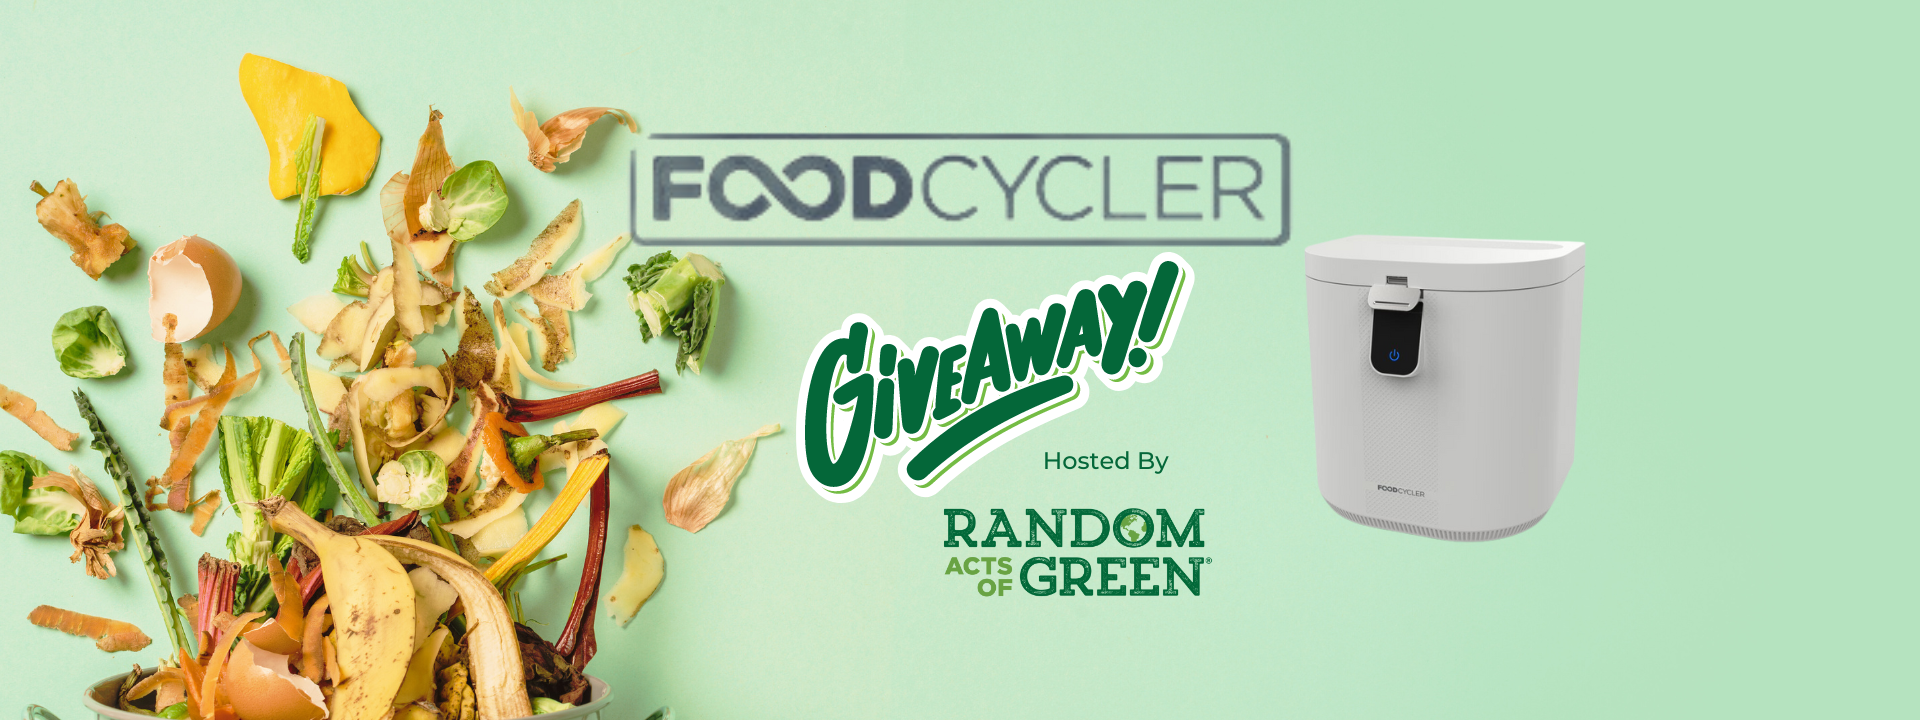 foodcycler giveway